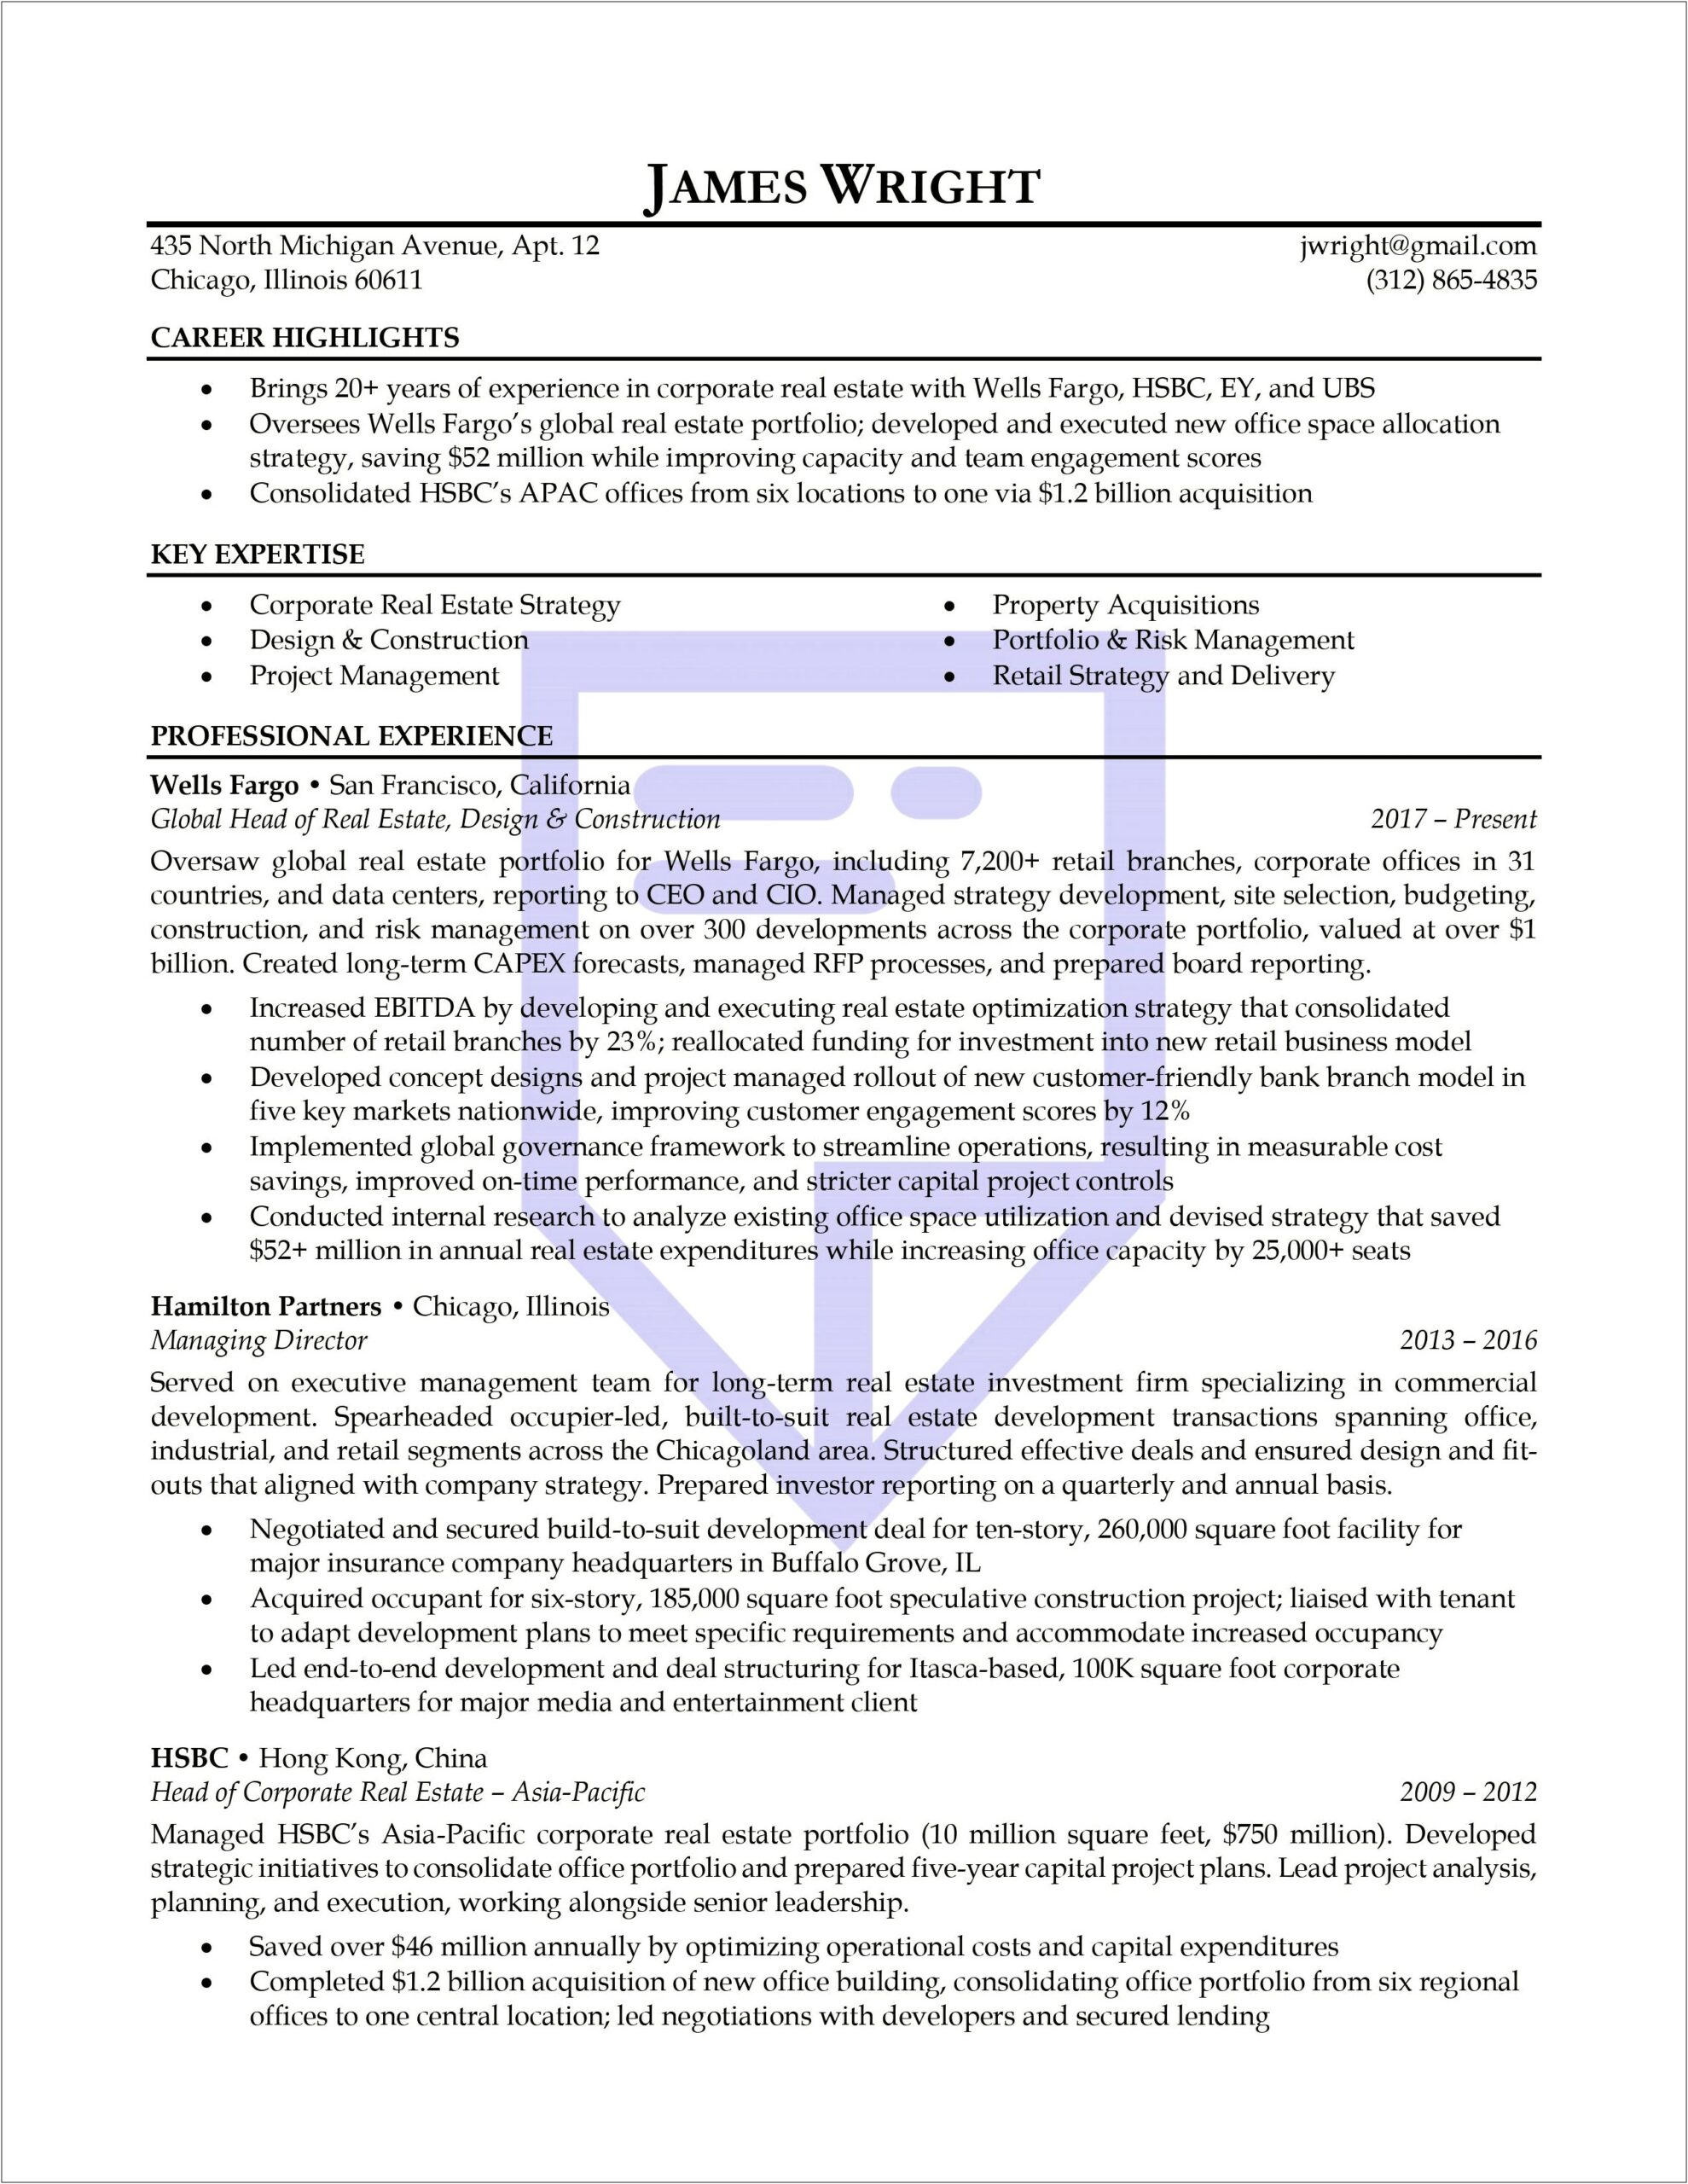 Resume Examples For Construction Directors